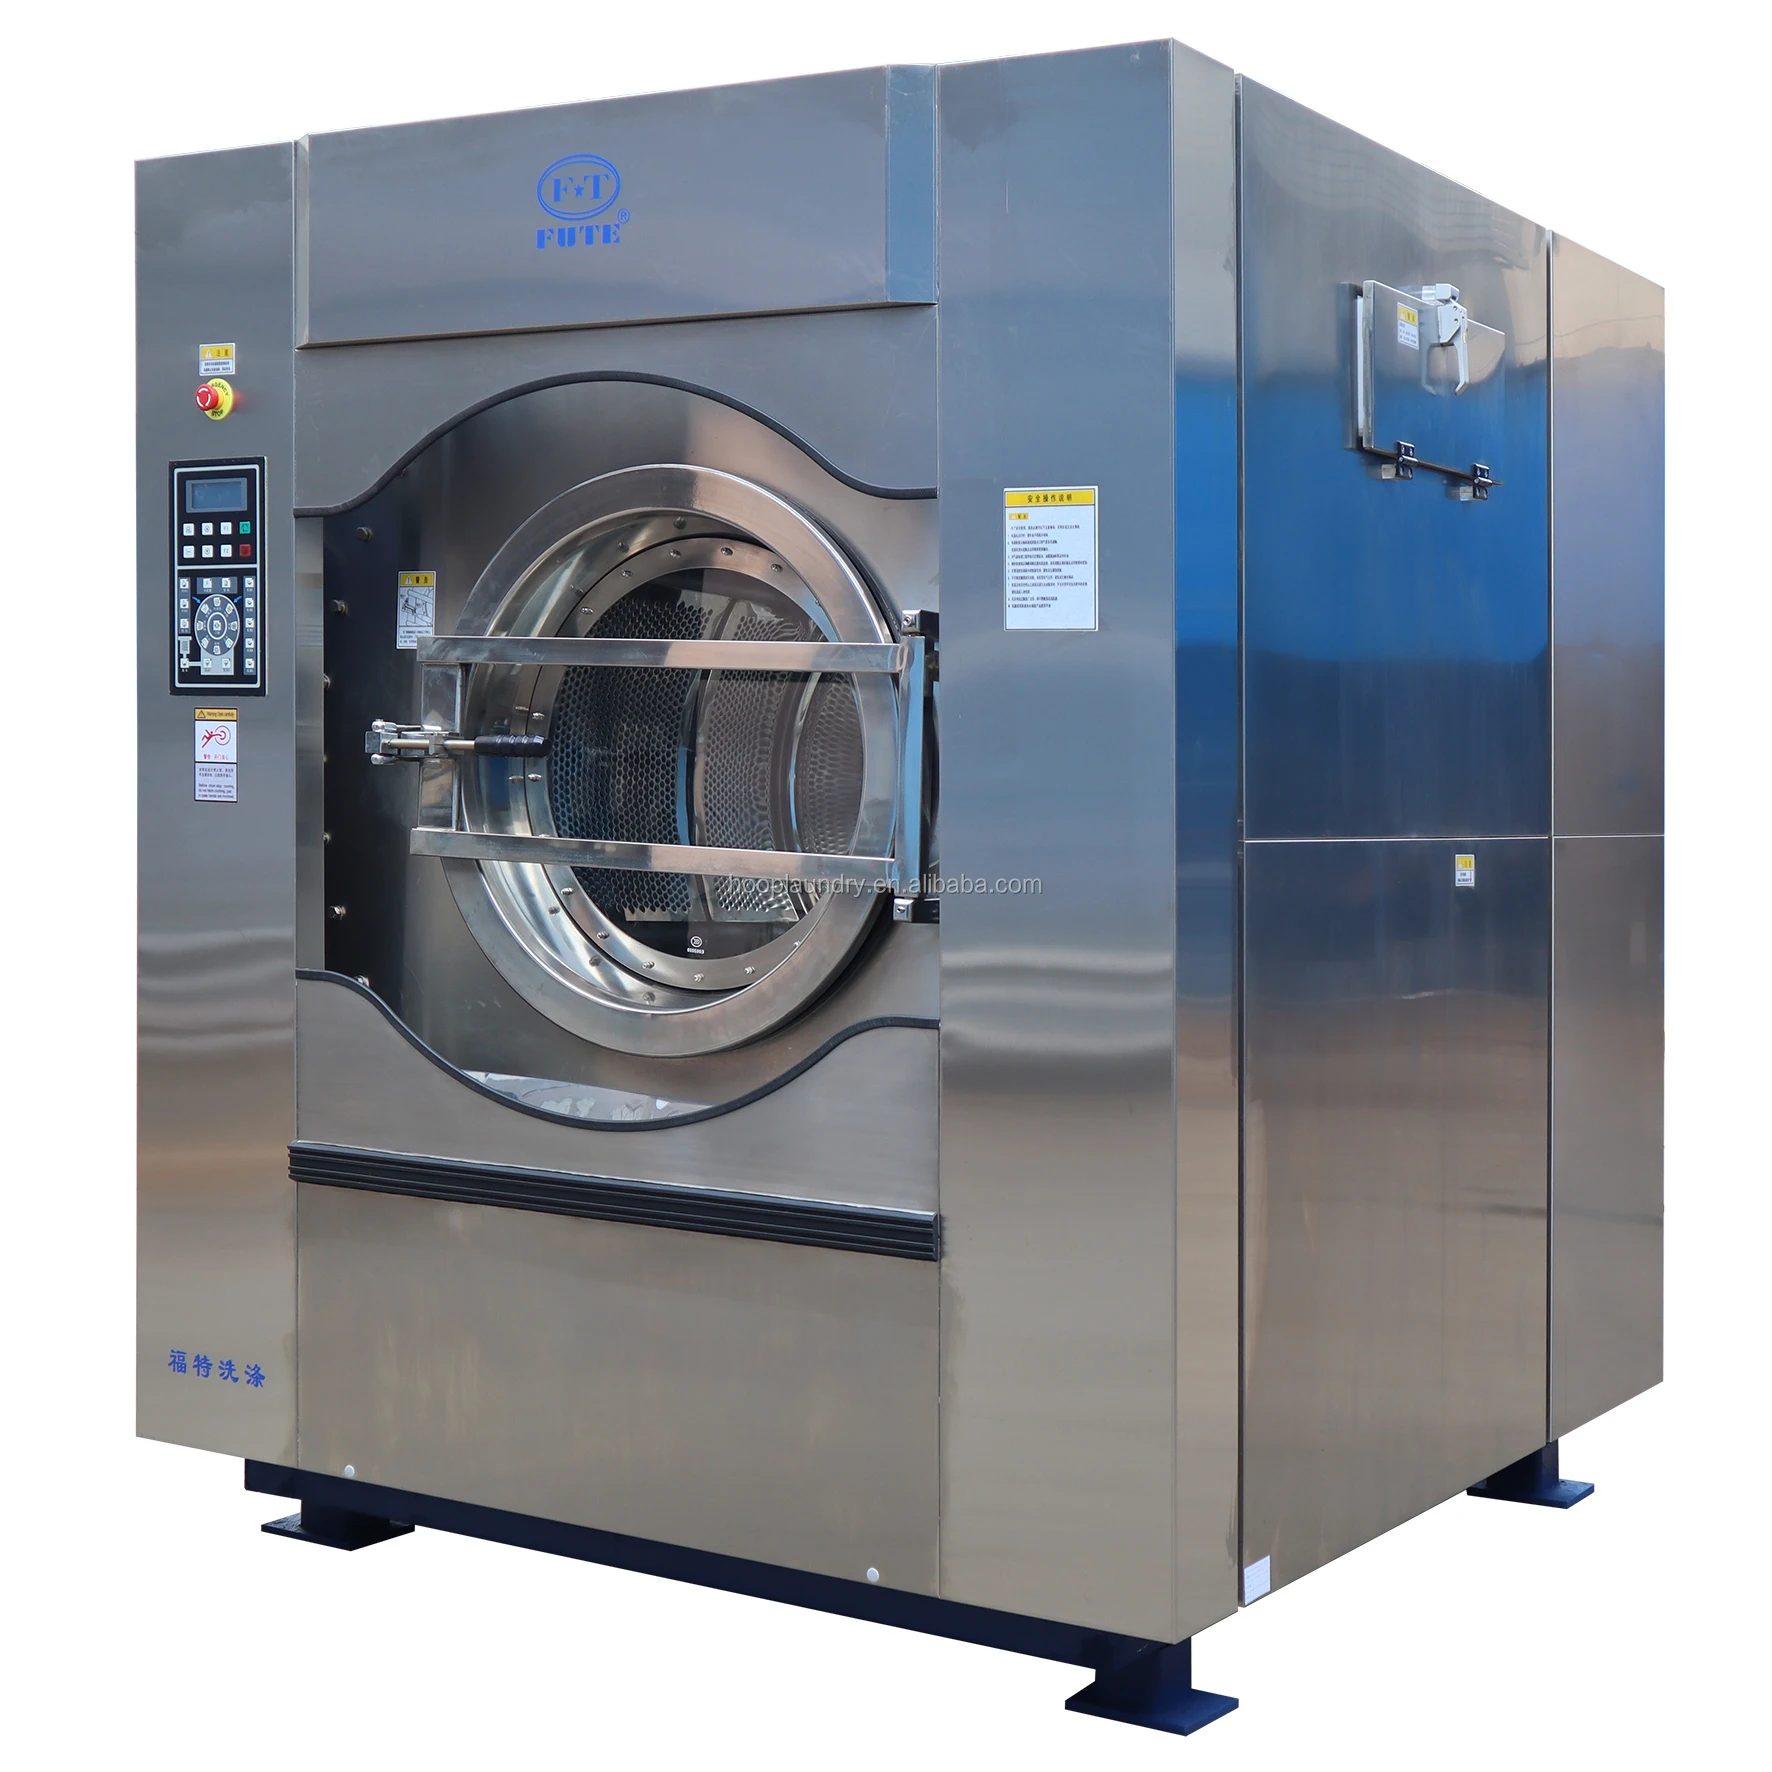 Washing machine commercial laundry equipment 30 kg steam washer extractor